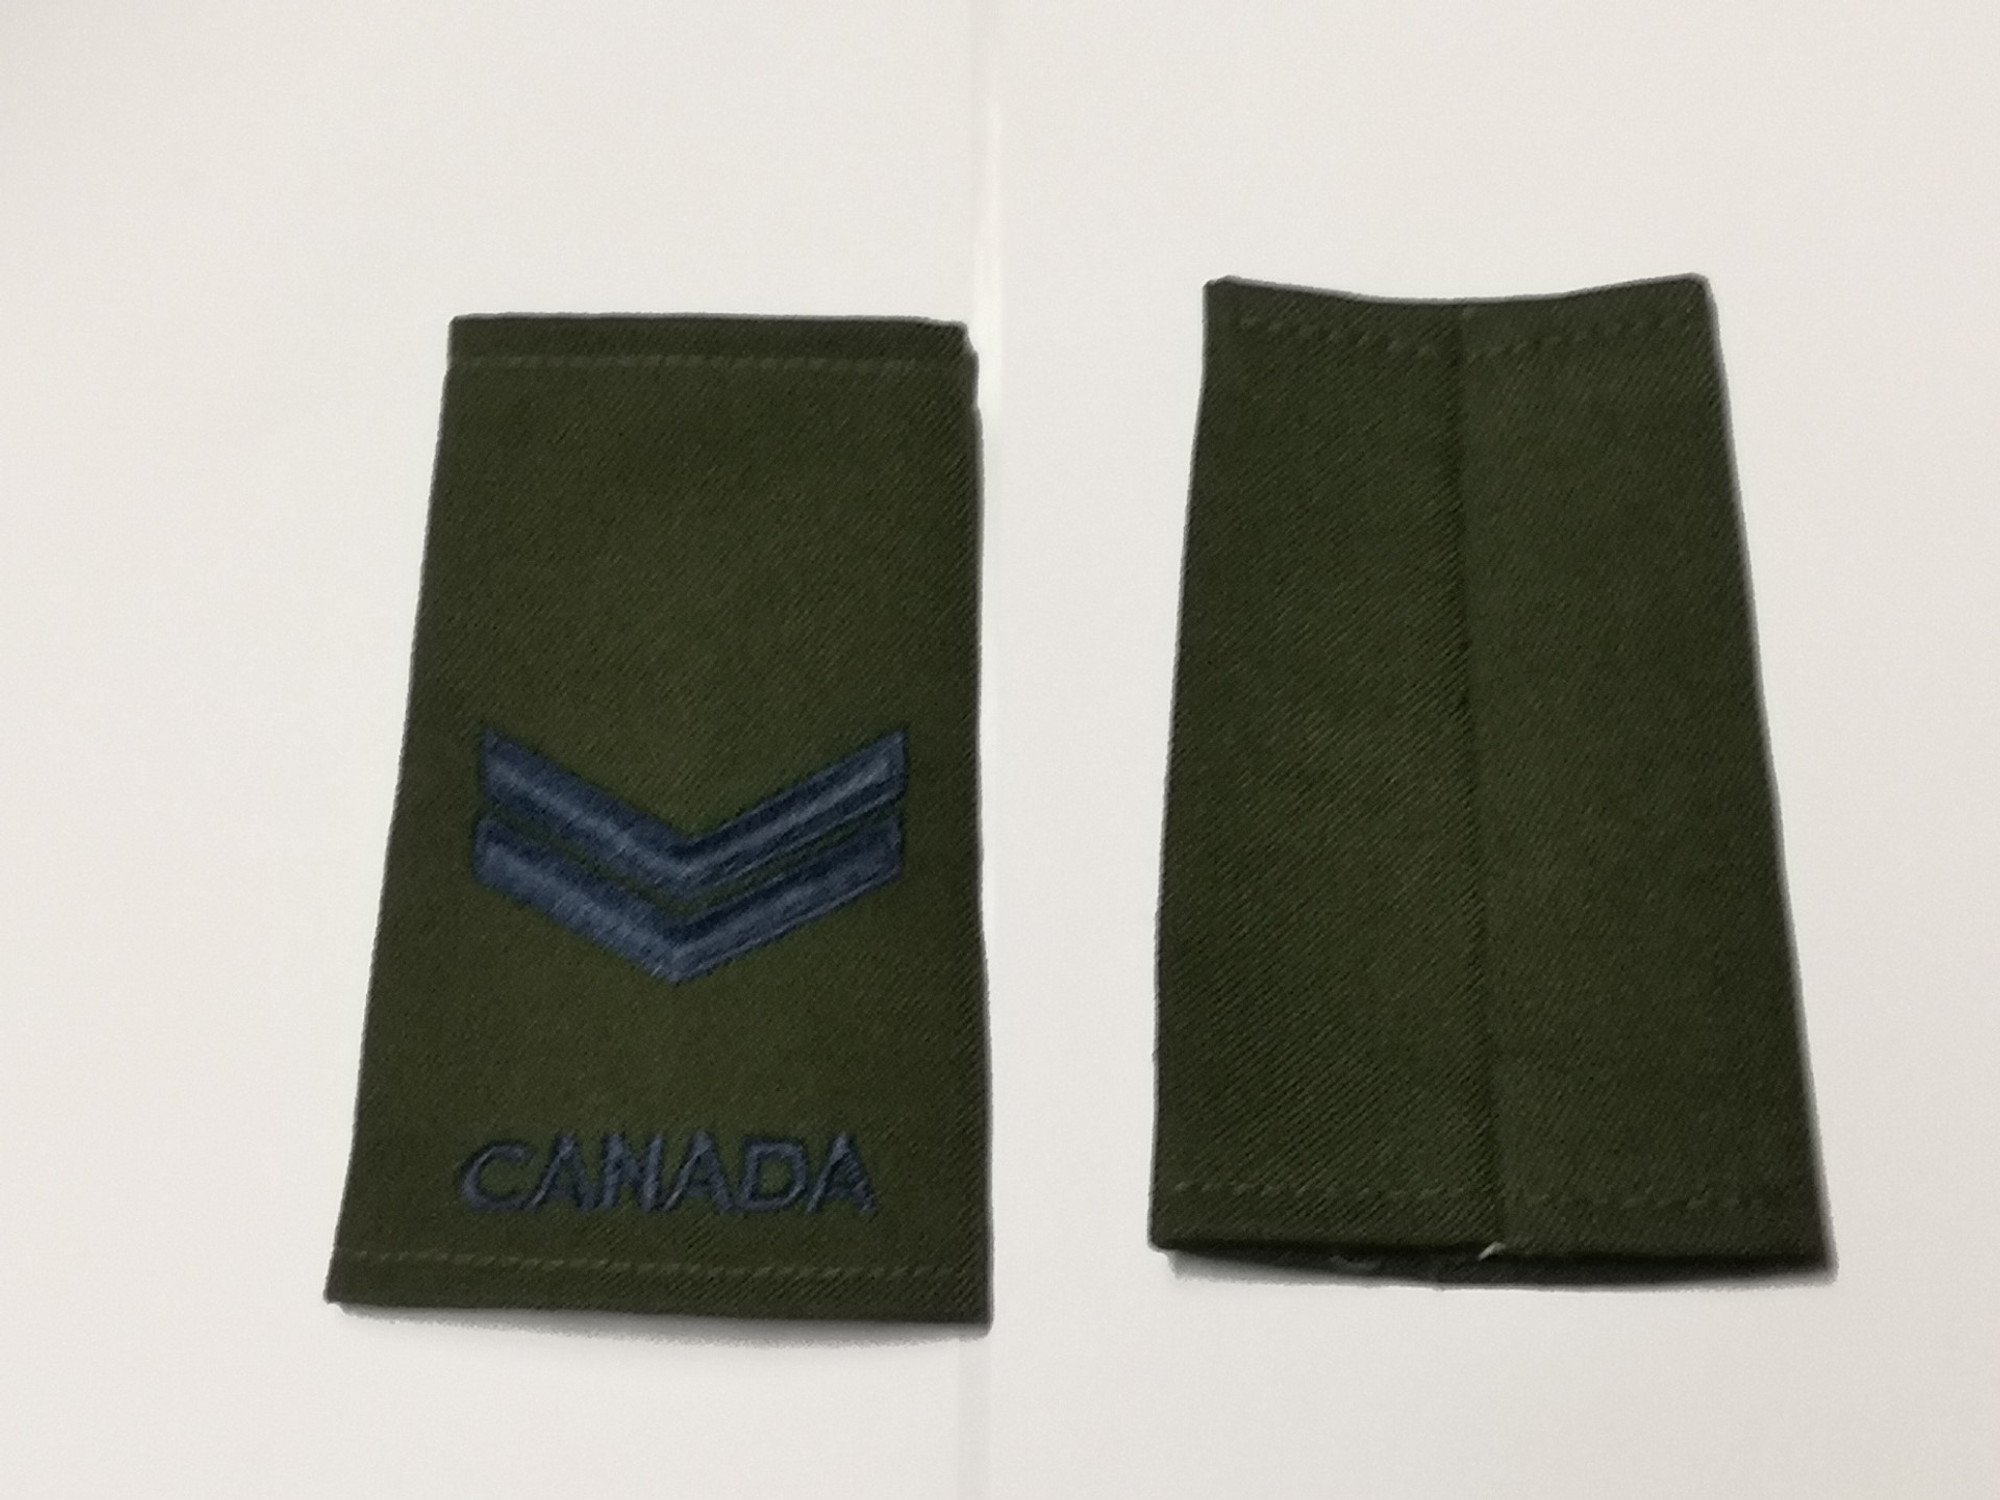 Canadian Armed Forces Green Rank Epaulets Air Force - Corporal